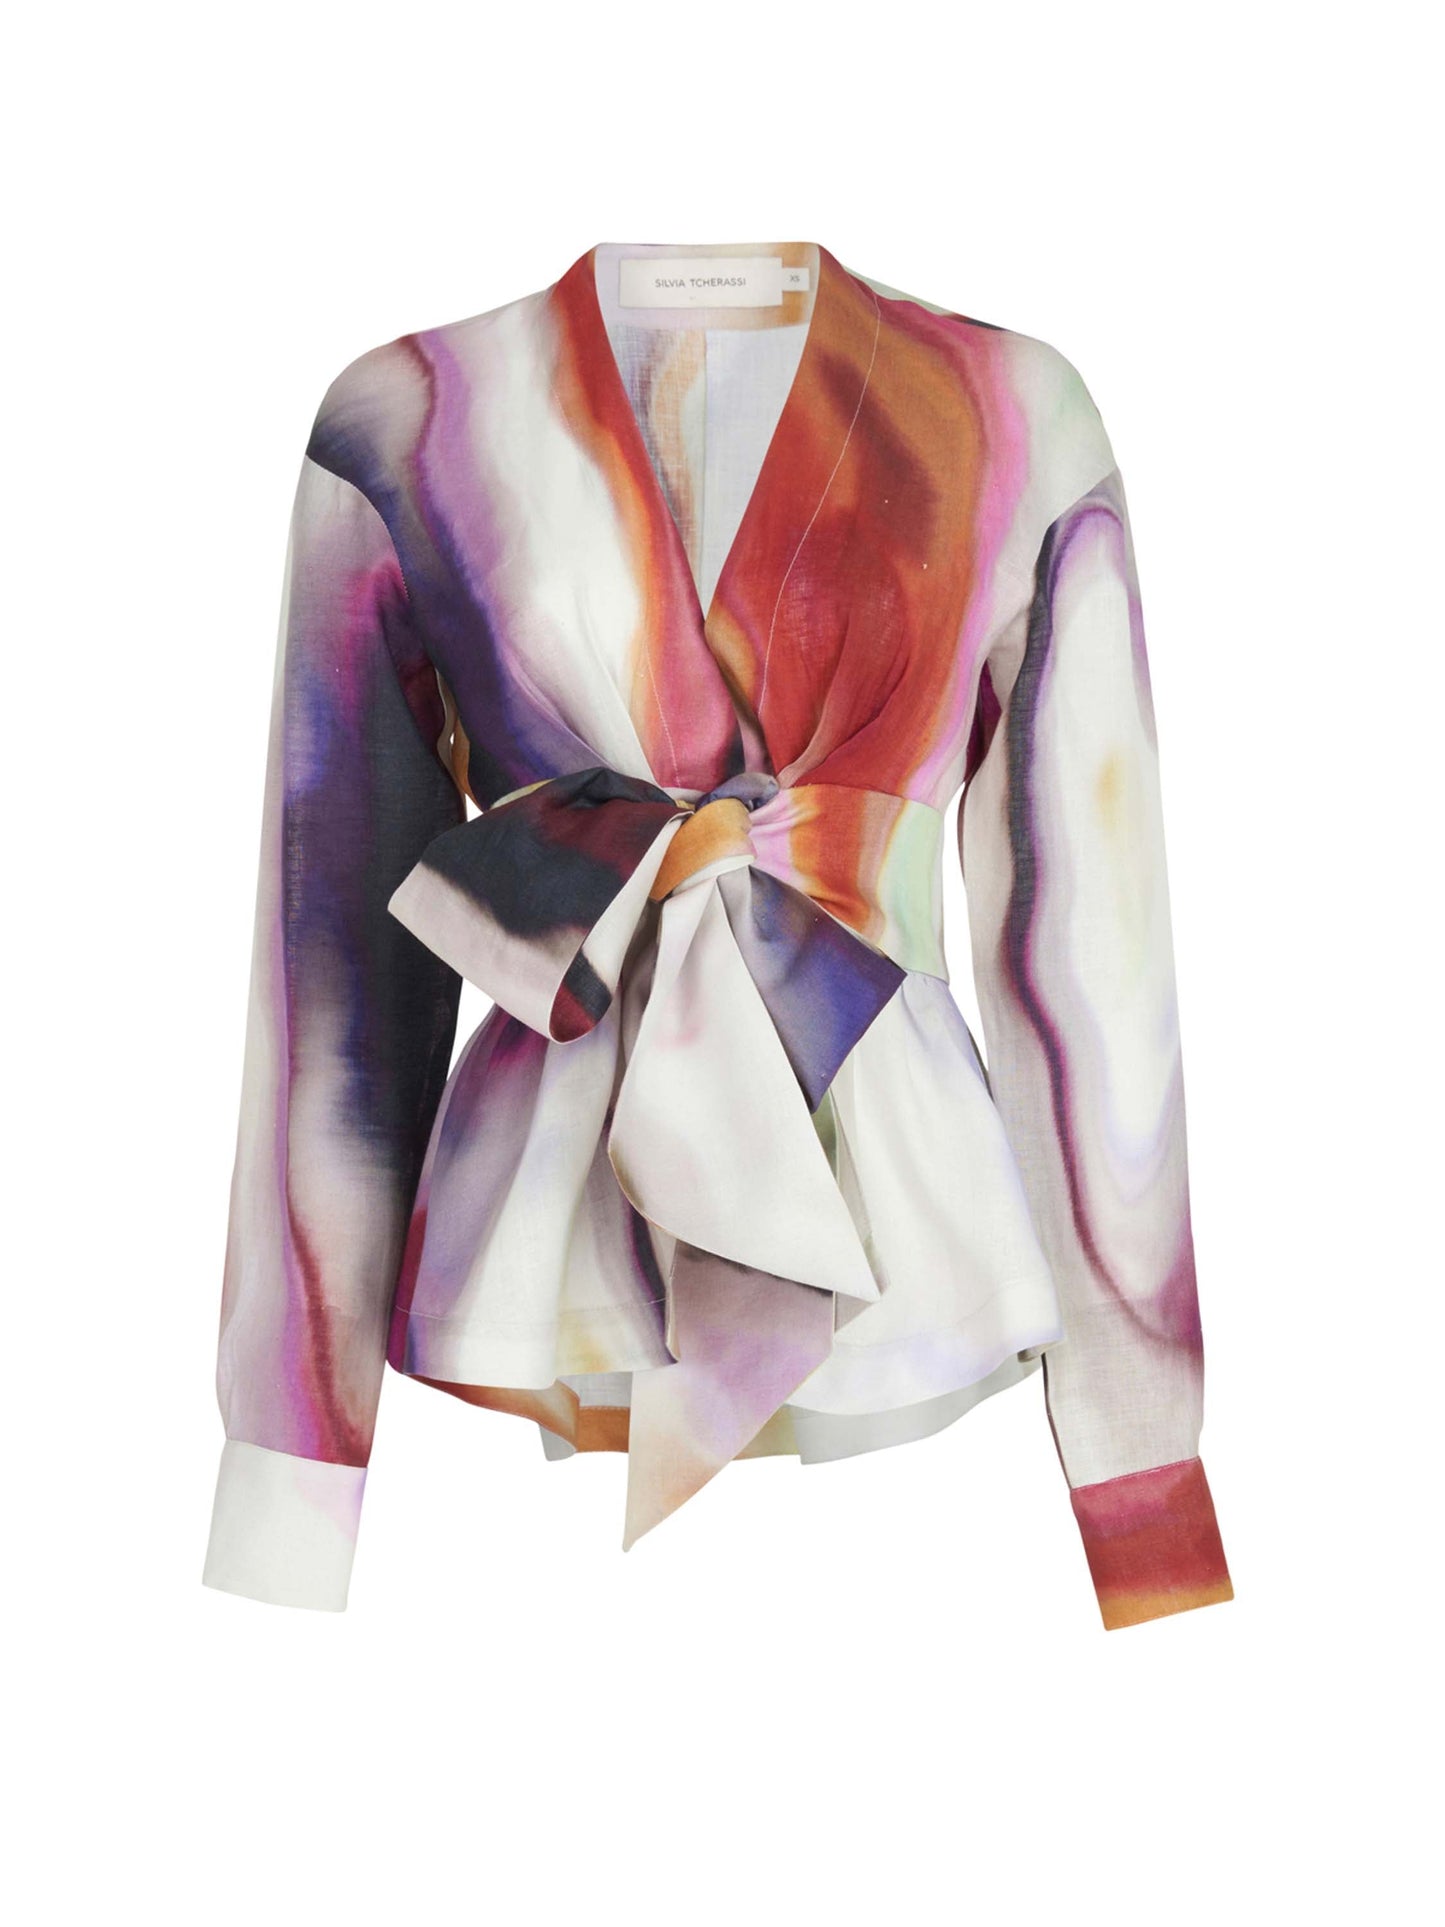 Introducing the Saanvi Blouse Iridescent Marble for women, featuring a vibrant marble print.